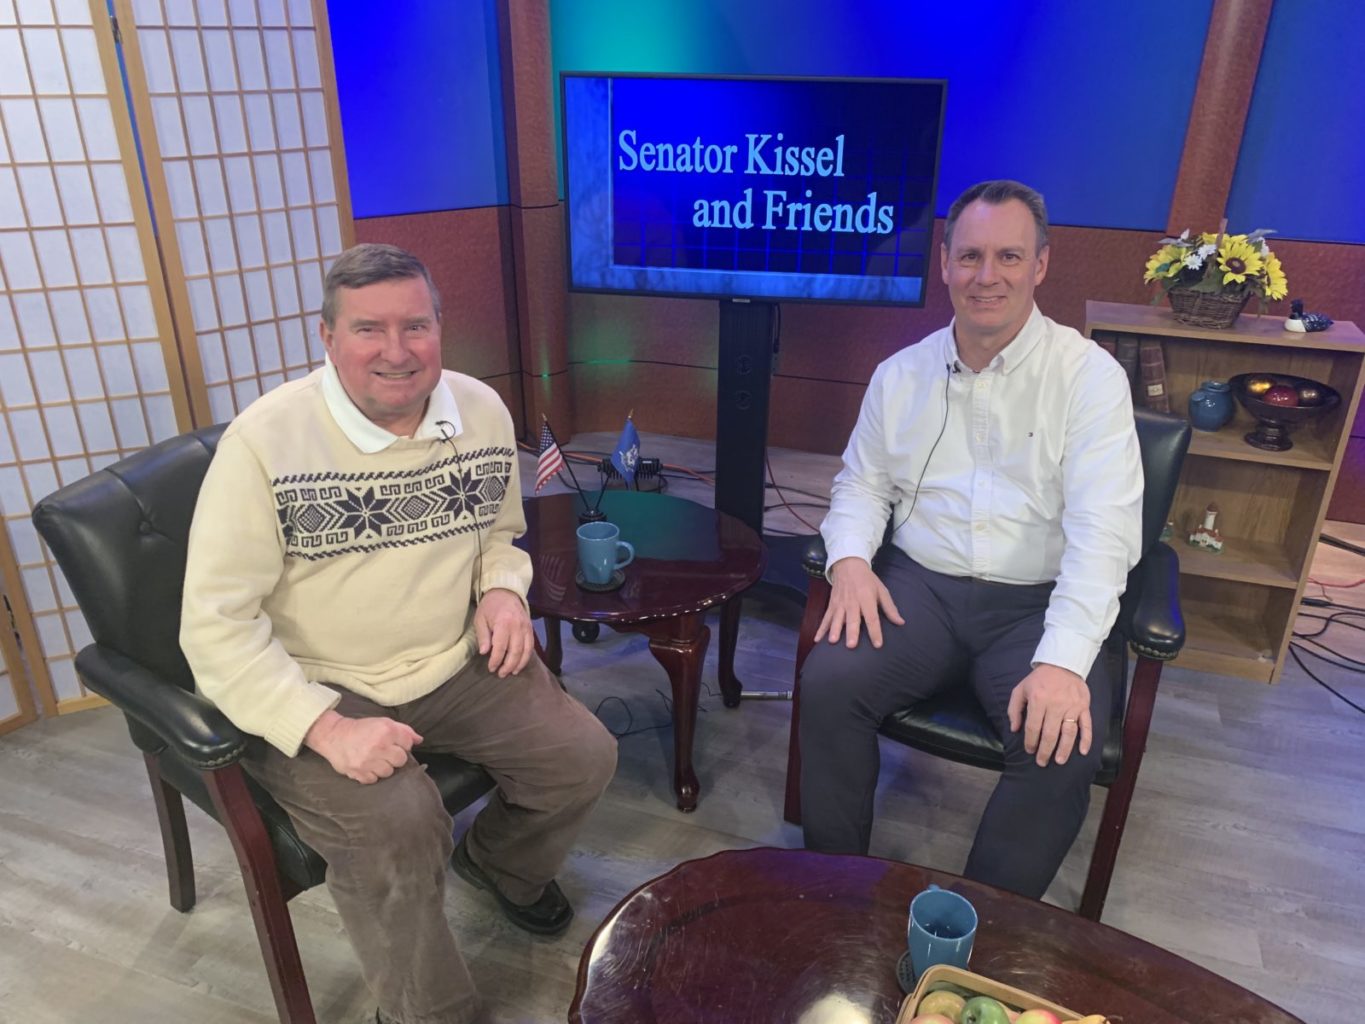 Suffield’s Director of Community Services Peter Leclerc joins me to discuss the work that he and his team are doing in beautiful and historic Suffield.